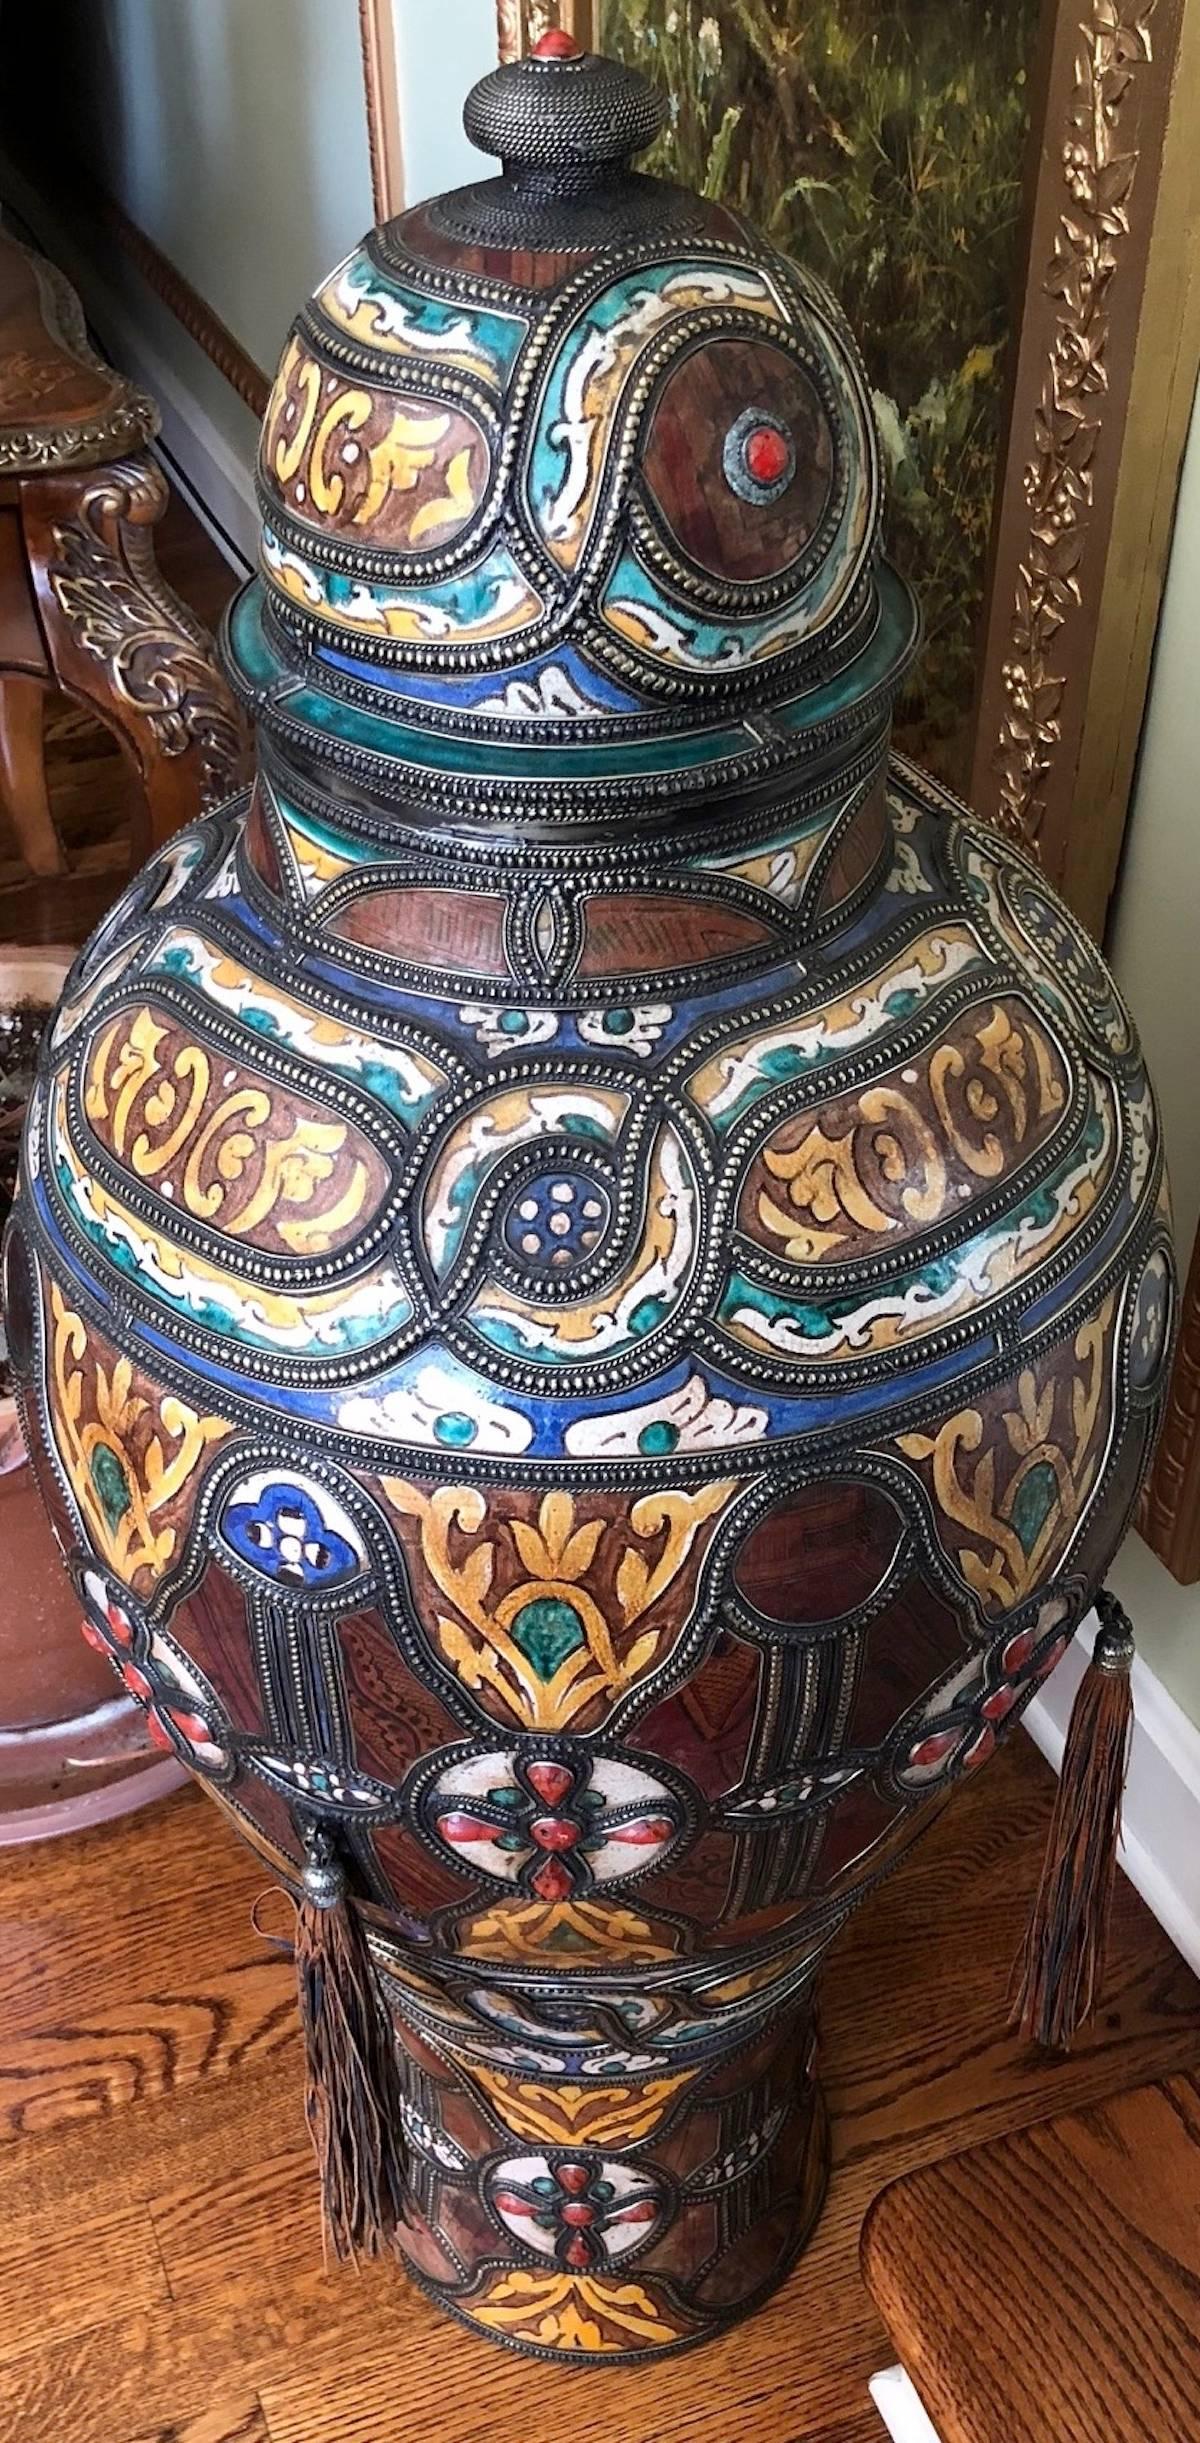 Large Moroccan porcelain and metal palace urn. One of two in this auction. Measures 40 inches in height.